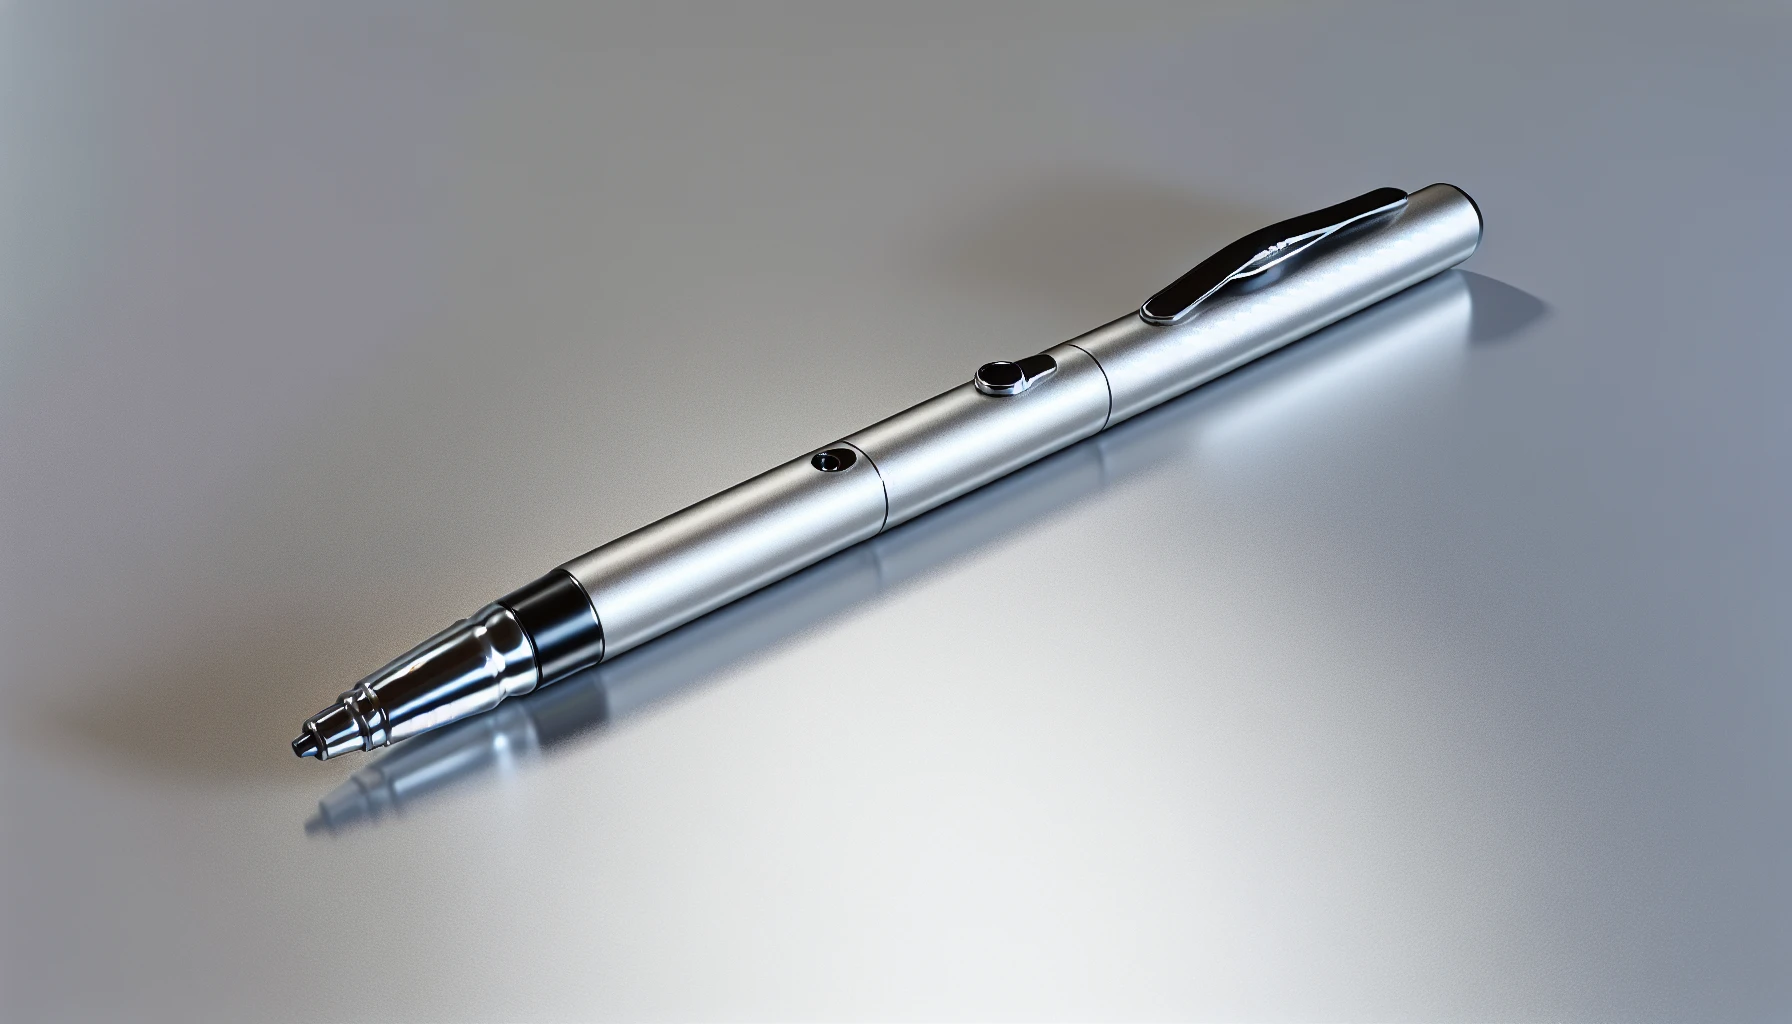 The Smoker's Pen, a metal pipe disguised as a pen